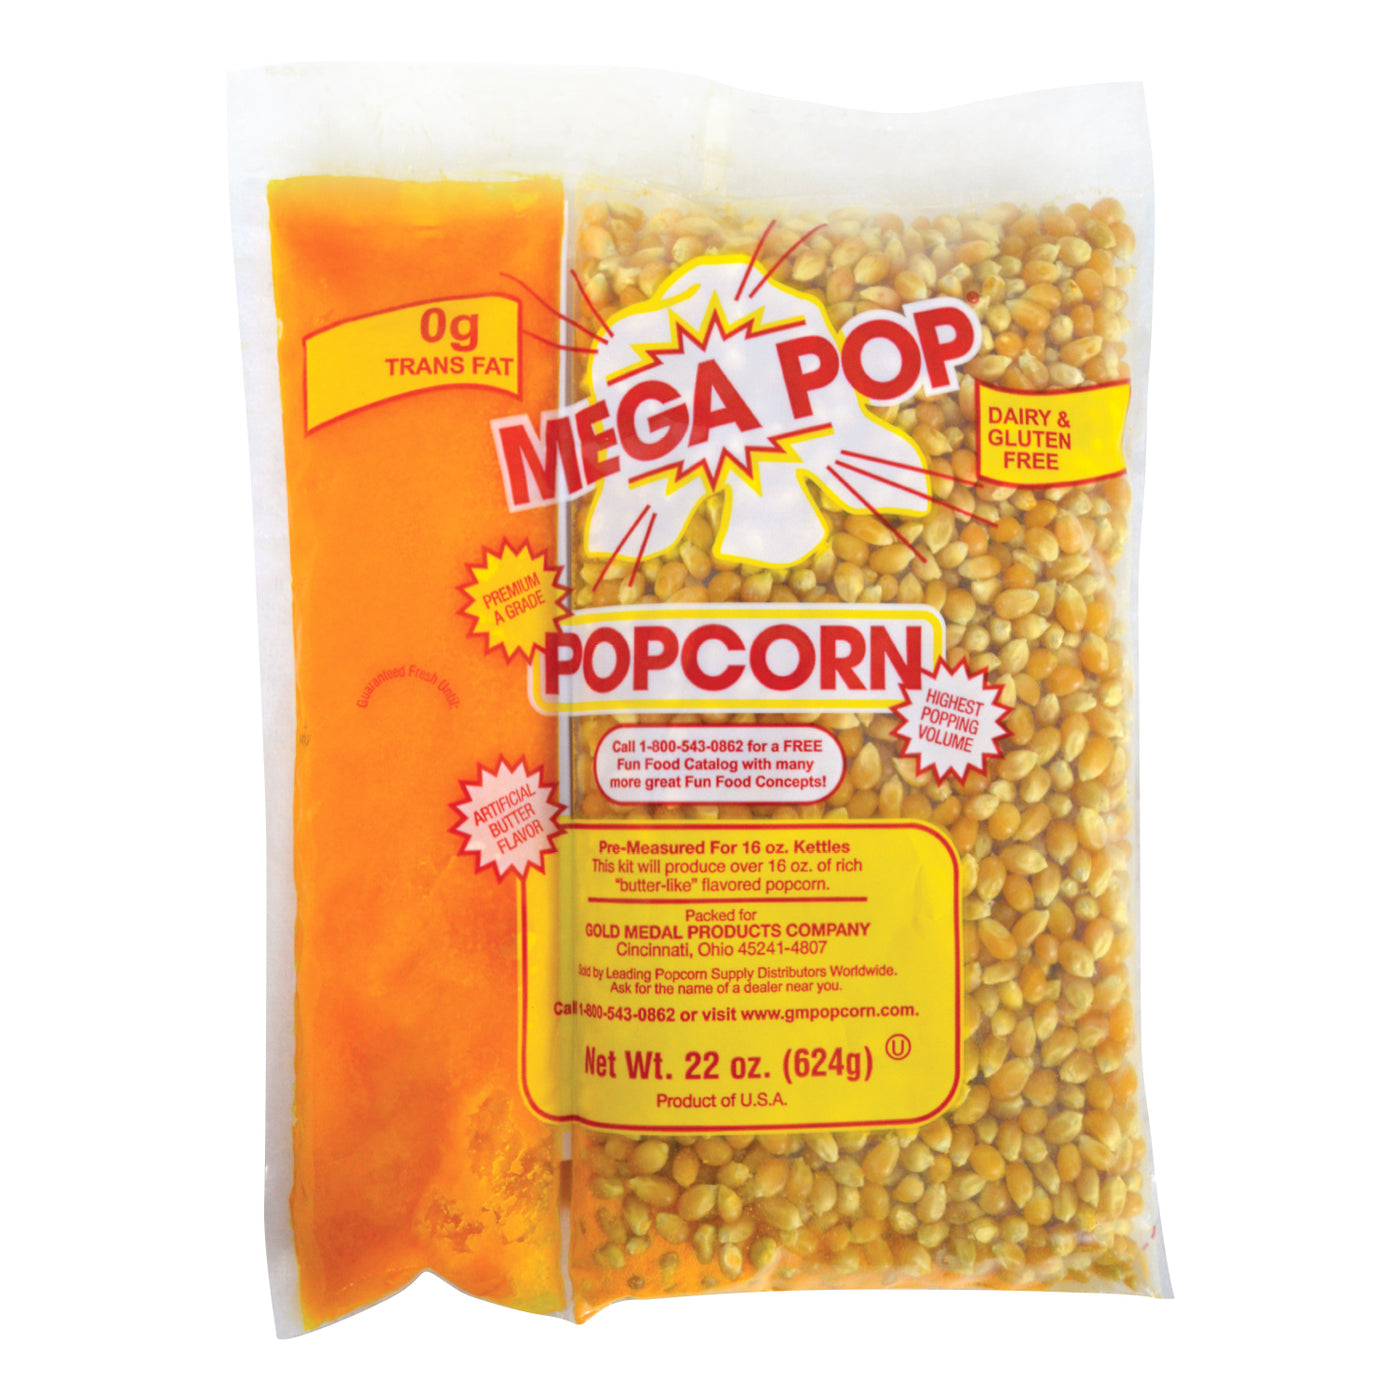 Popcorn Supplies | Case for 16-oz. Kettle - Gold Medal #2846 Gold Medal Products Co.